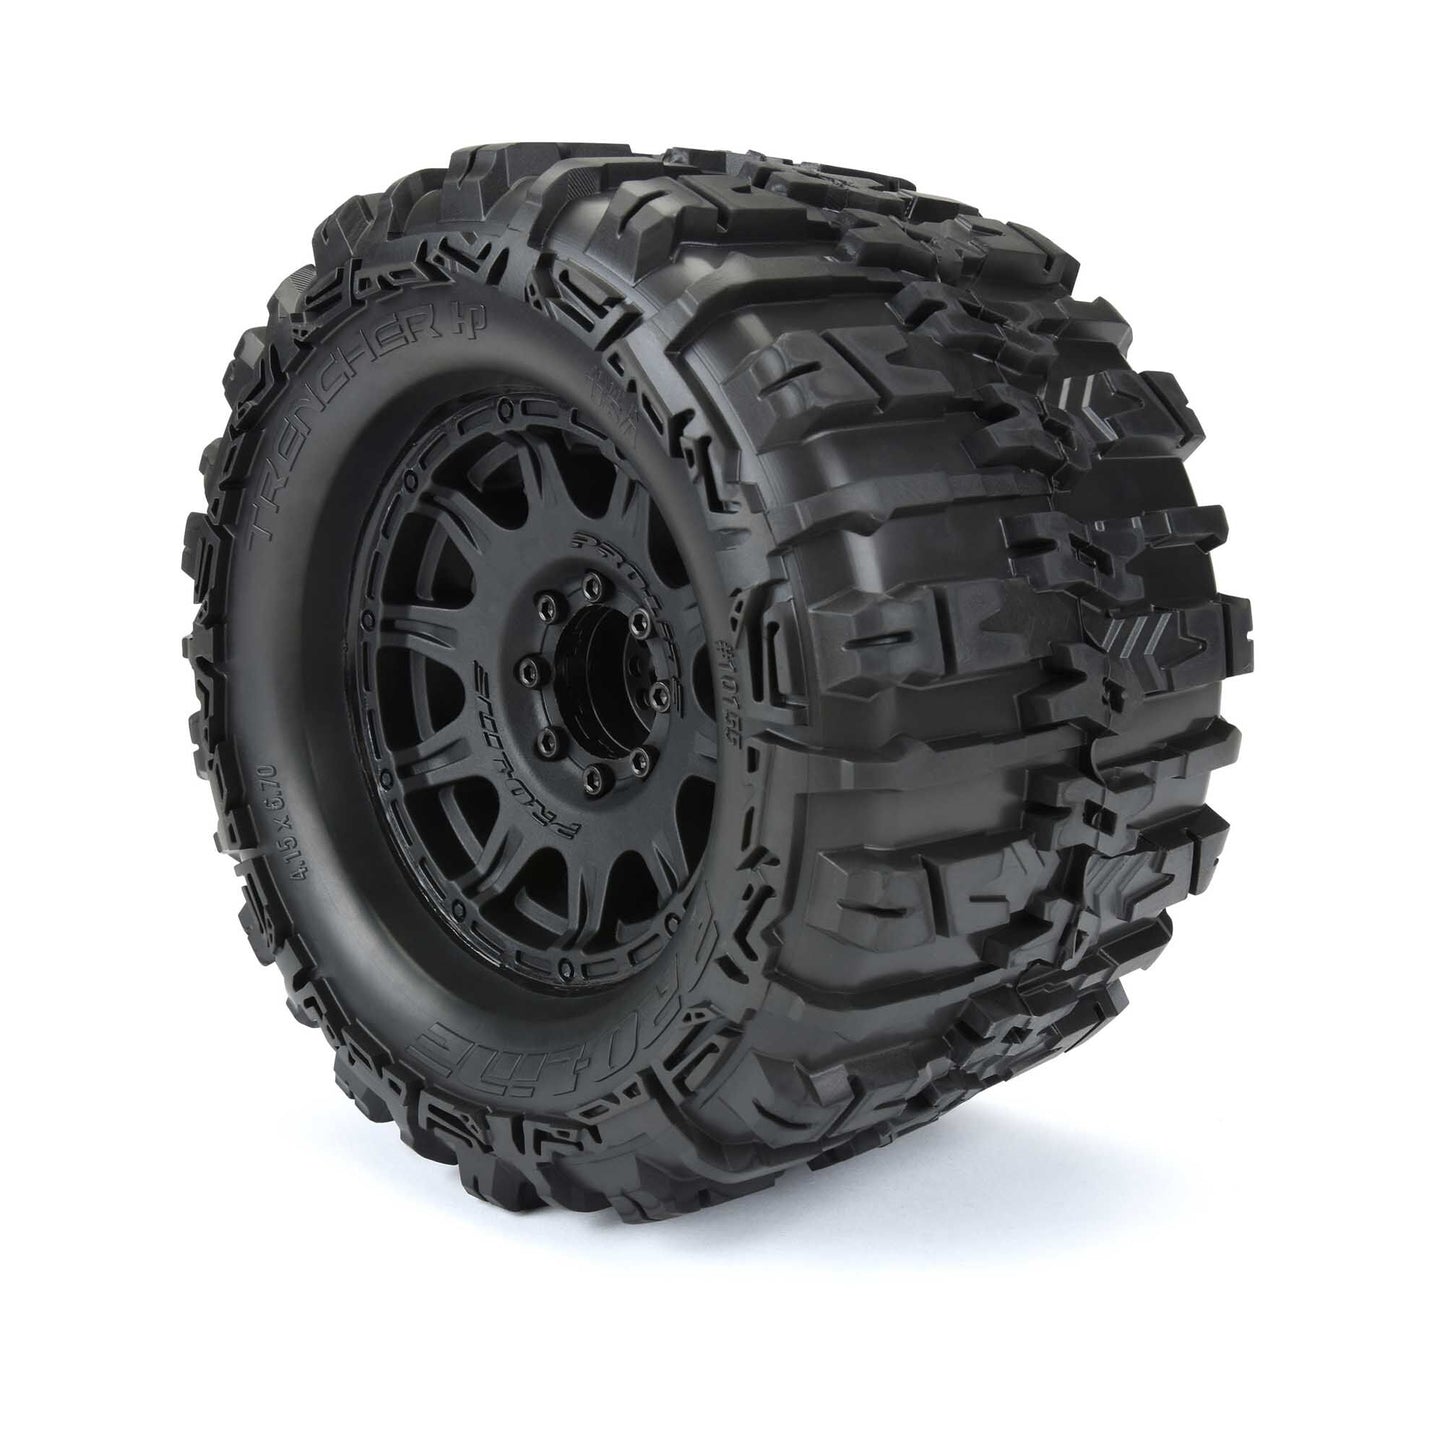 Pro-Line 1/8 Trencher HP BELTED F/R 3.8" MT Tires Mounted 17mm Blk Raid (2)